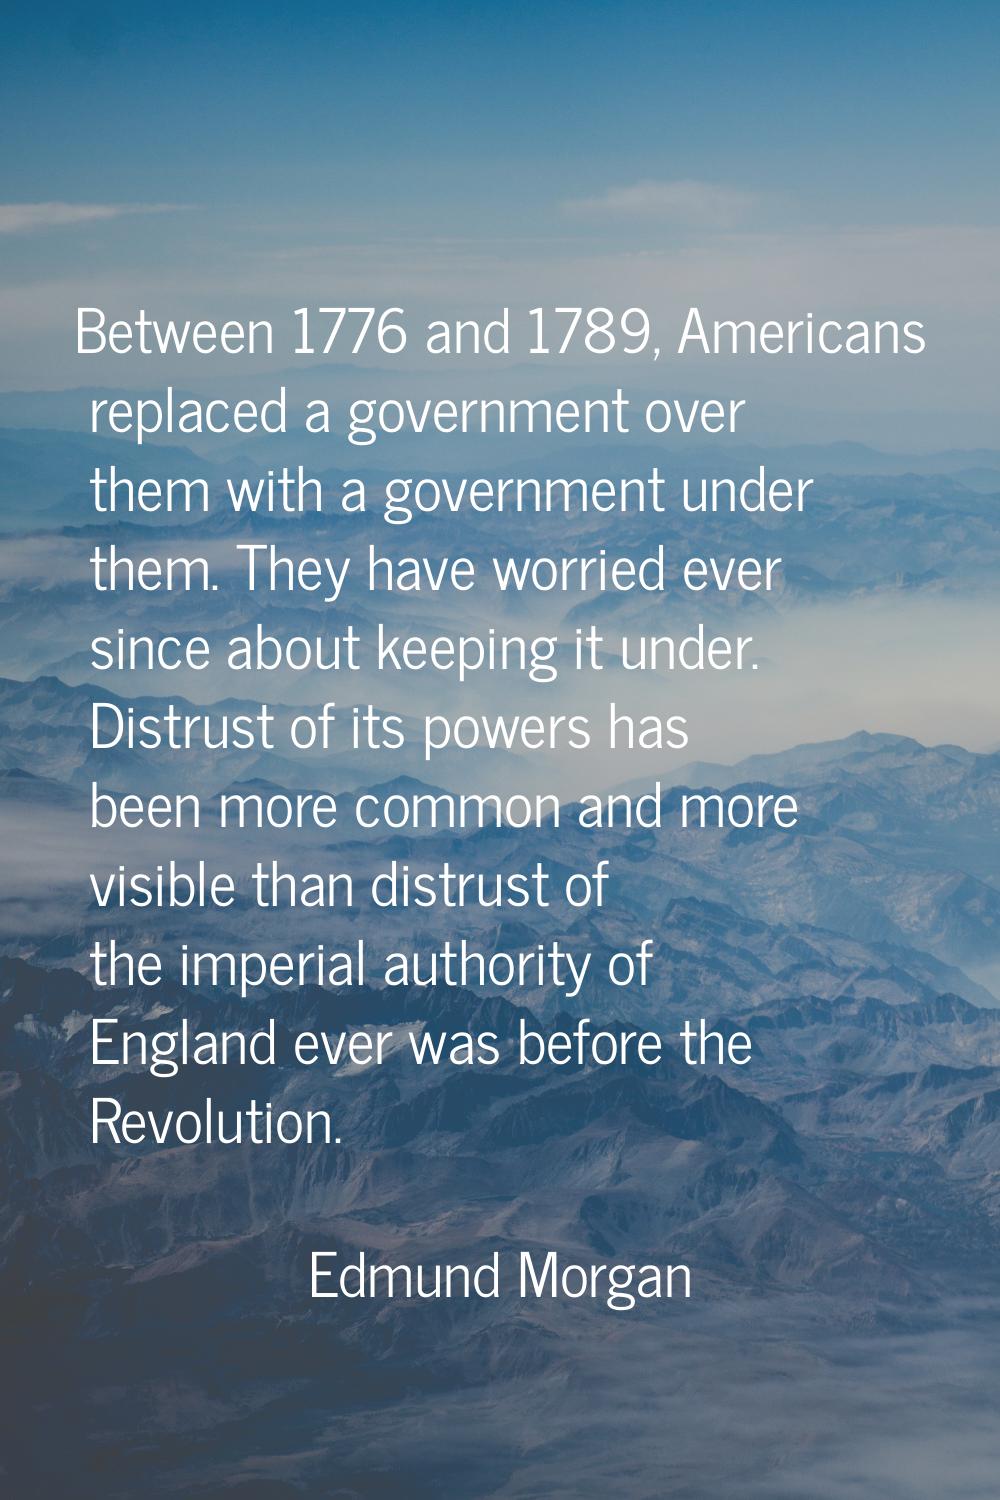 Between 1776 and 1789, Americans replaced a government over them with a government under them. They